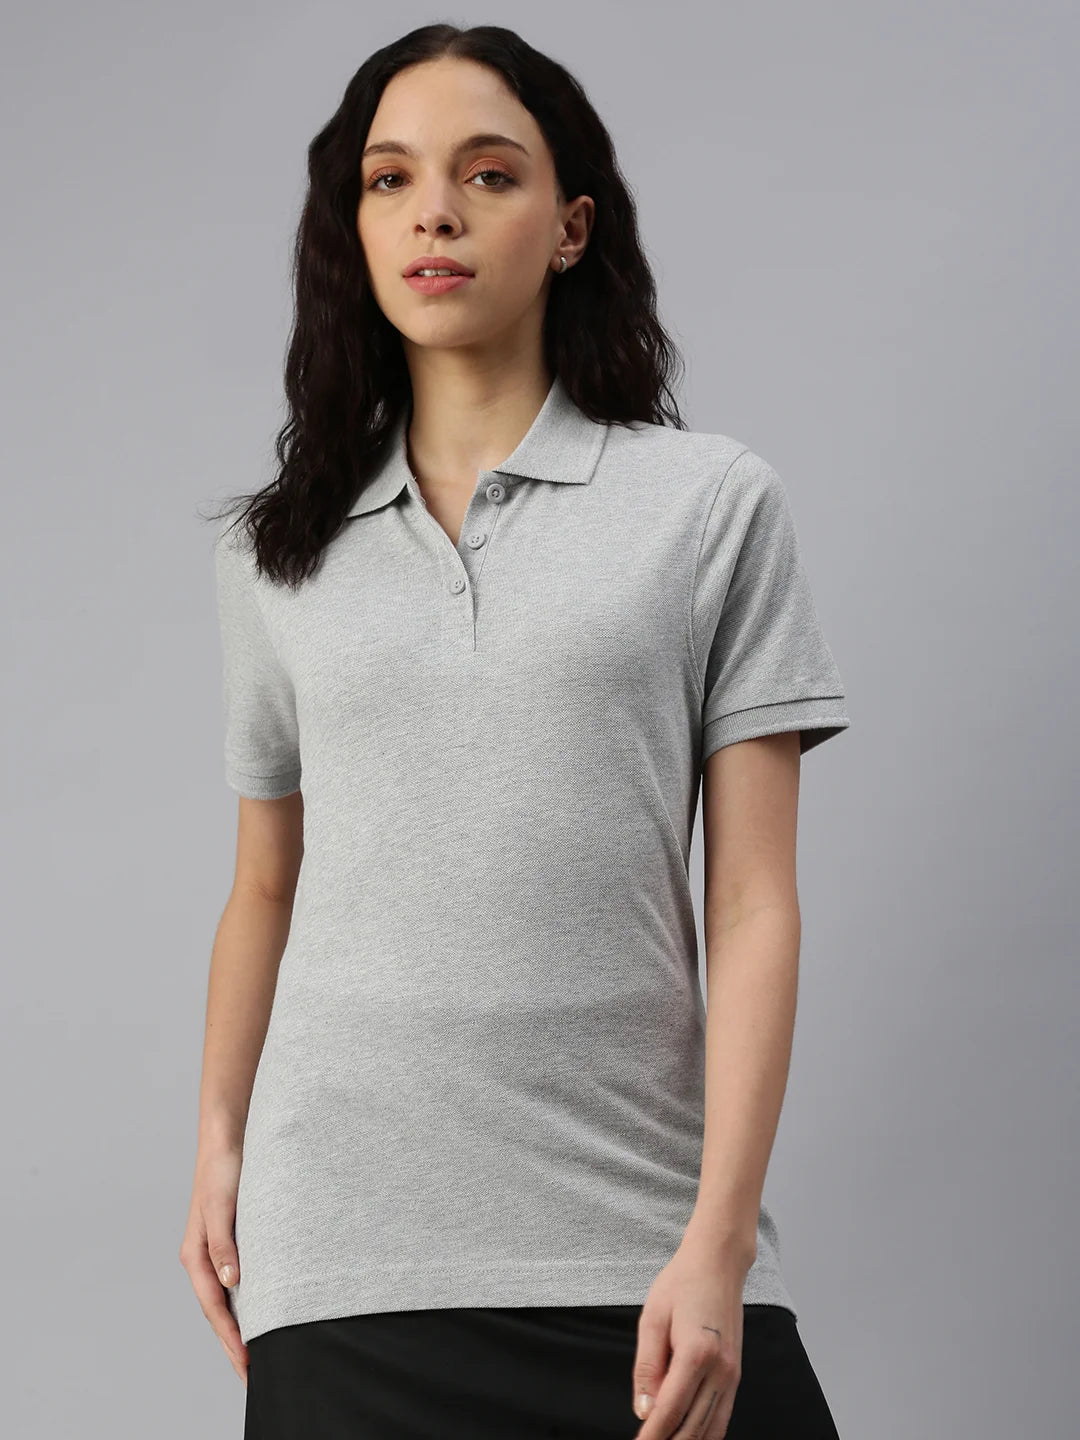 Women's Whale Cotton Polo Shirt Gris Chine Front